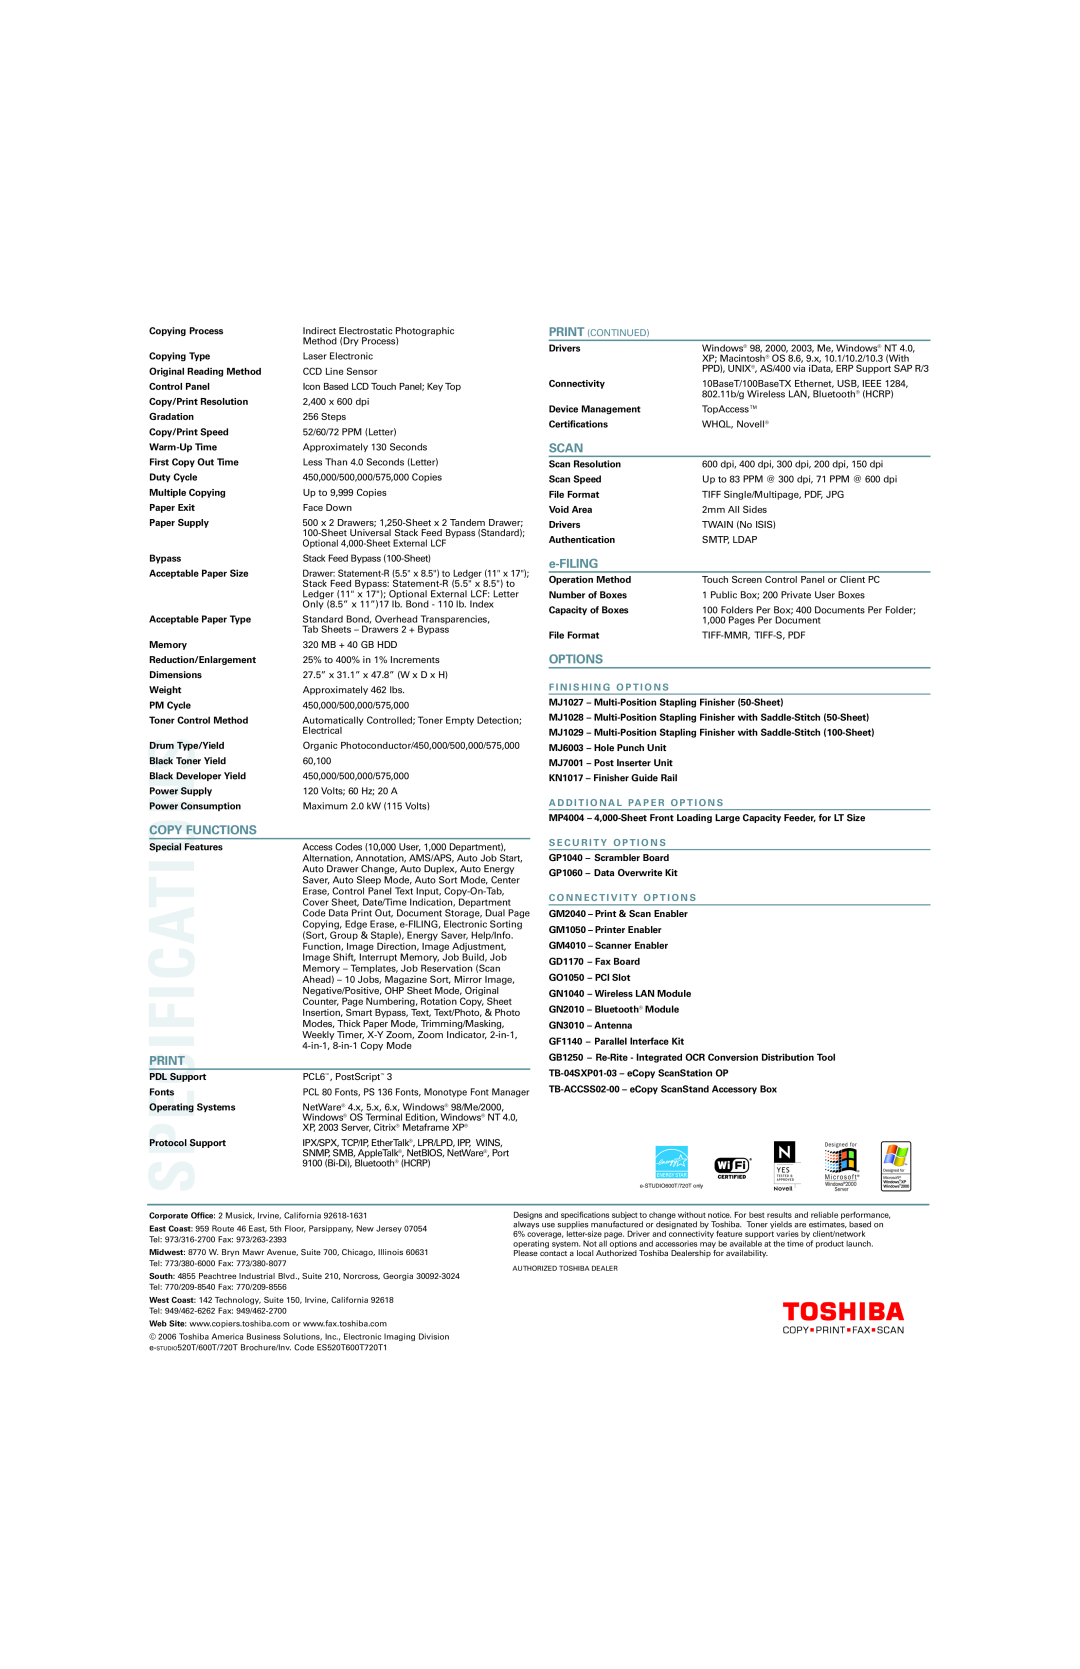 Toshiba 600T, 720T, 520T manual Copy Functions, Scan, e-FILING, Options, Print Continued, F I N I S H I N G O P T I O N S 